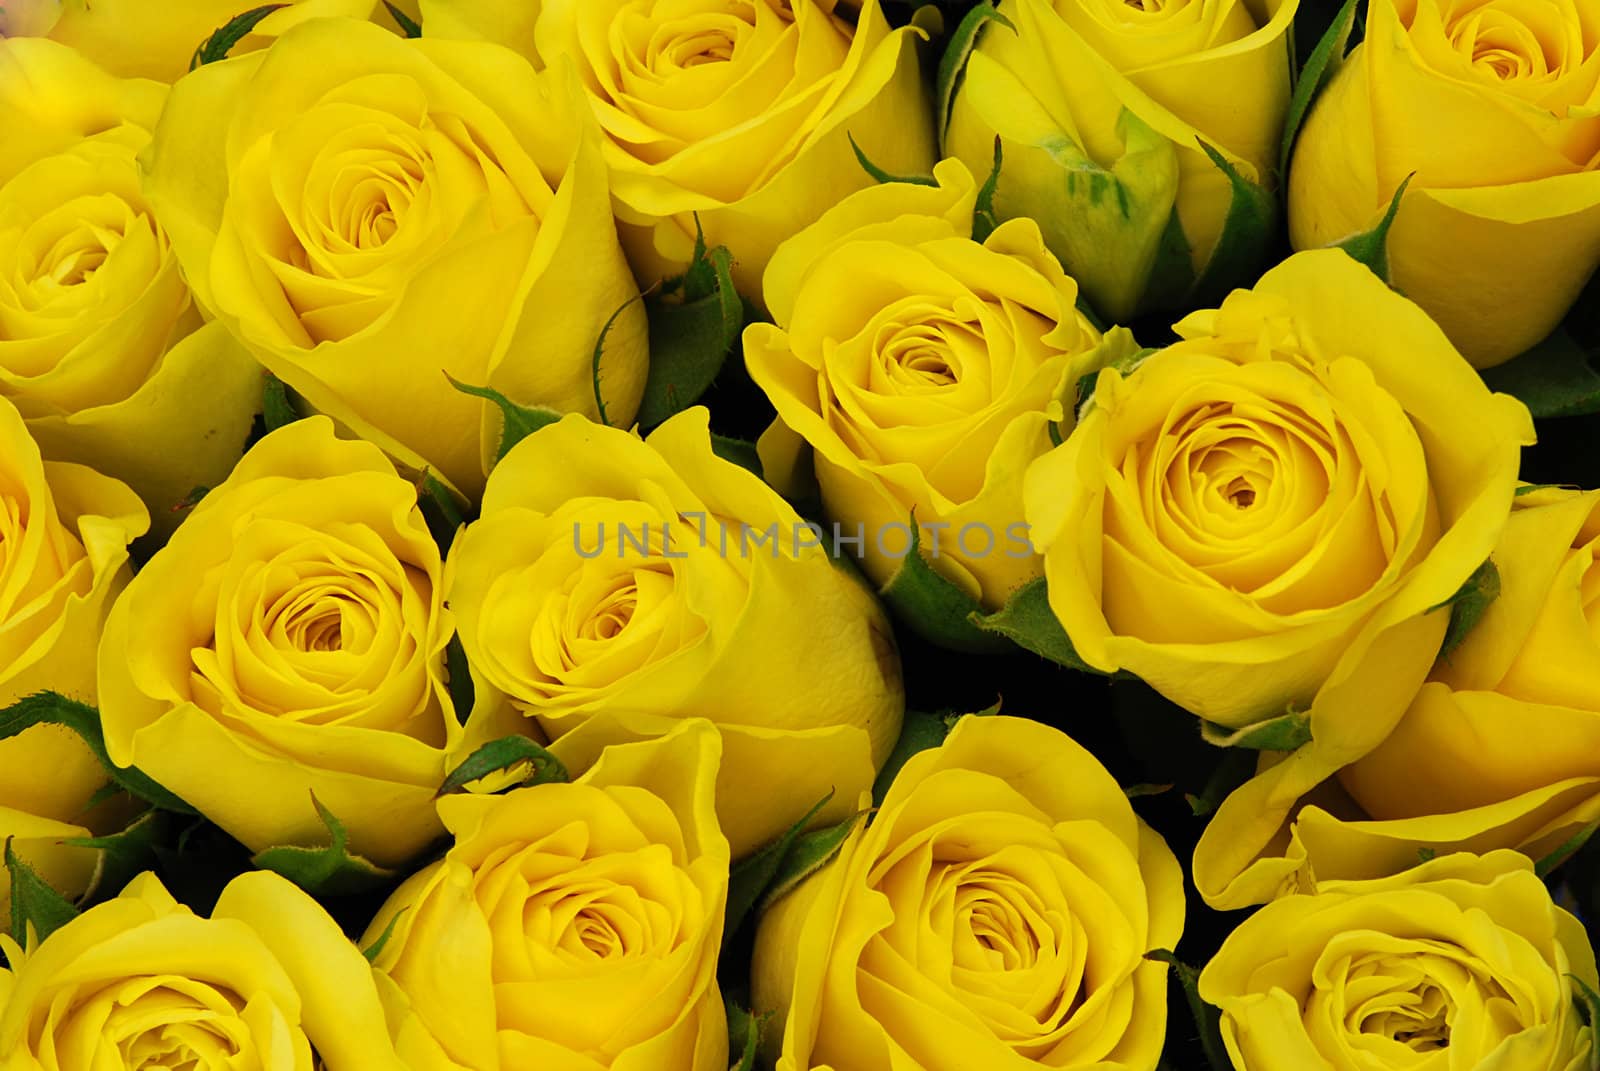 Yellow roses with leaves background - natural texture with fresh flower buds